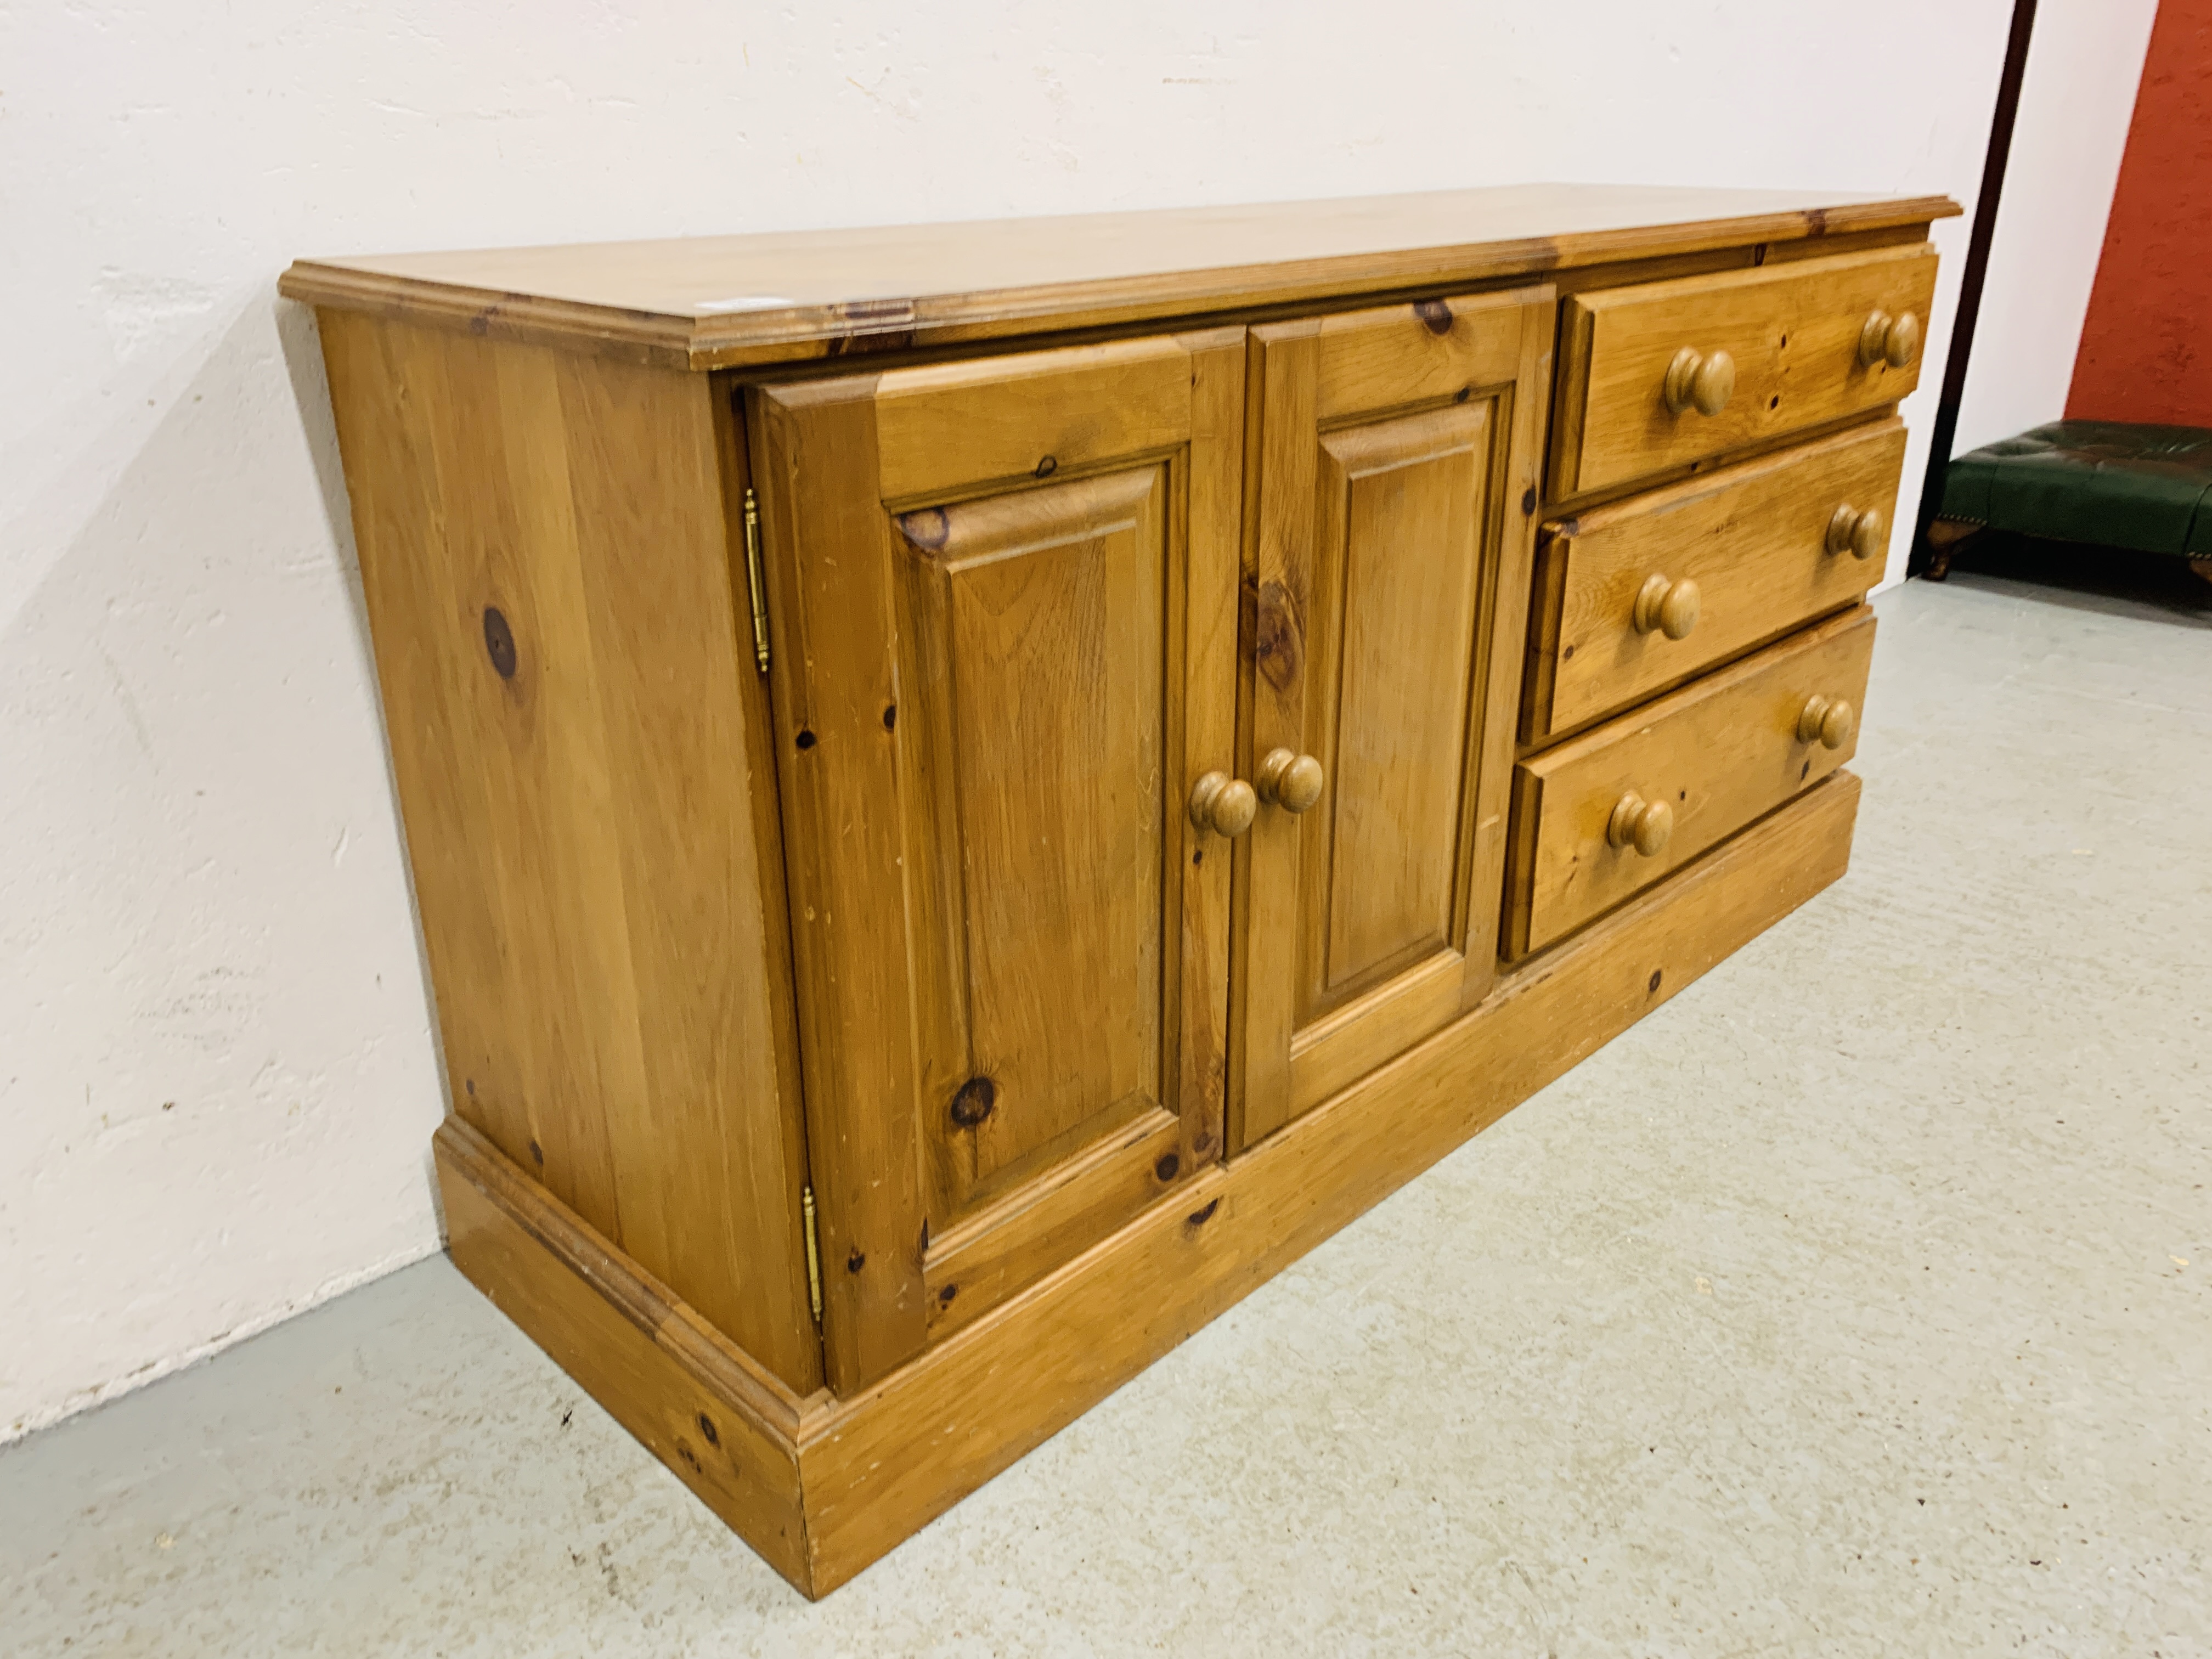 A SOLID HONEY PINE THREE DRAWER DRESSER BASE WITH CABINET TO ONE END - W 130CM. D 41CM. H 66CM. - Image 7 of 9